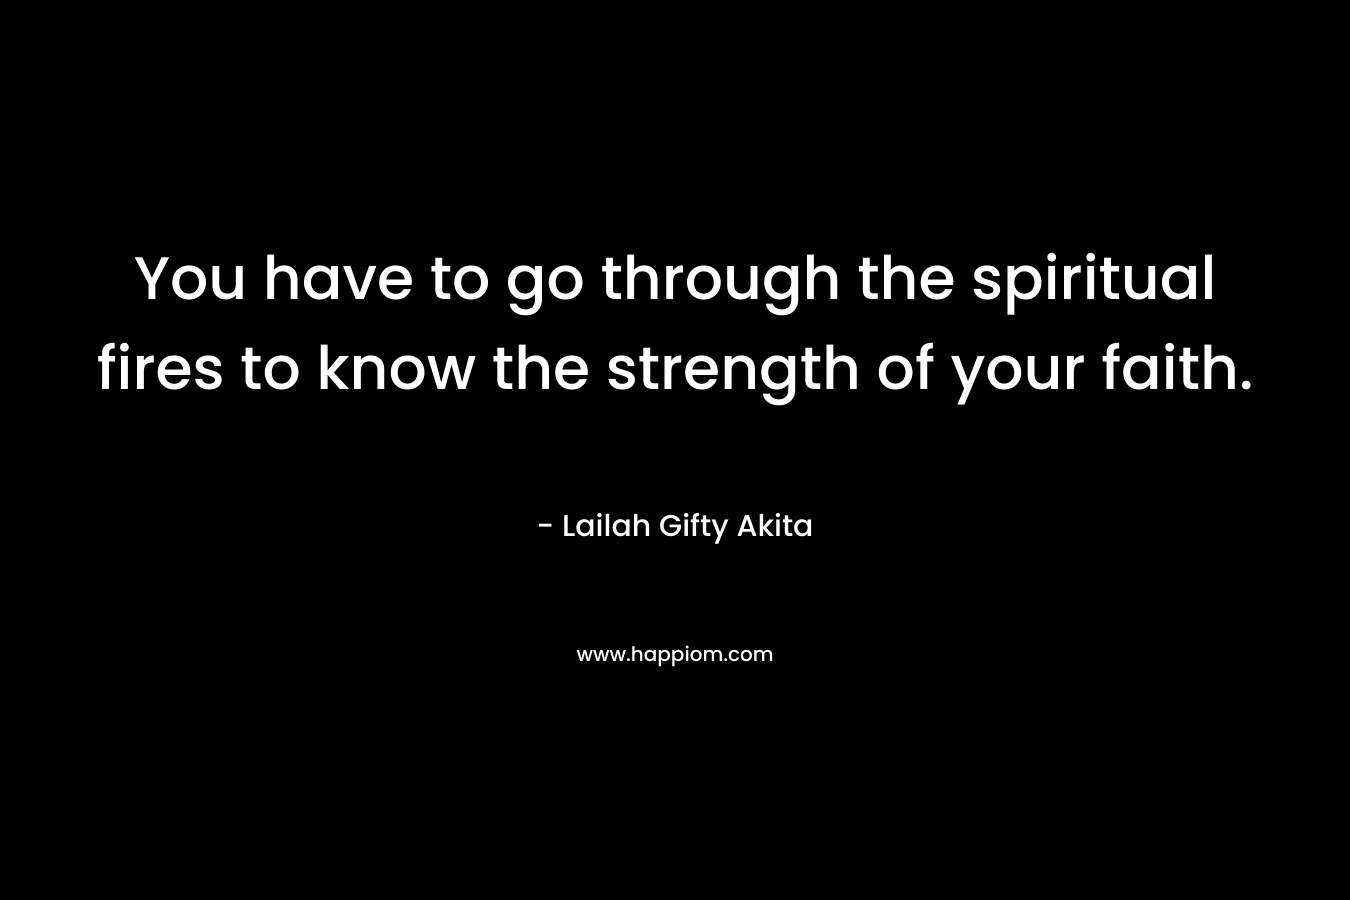 You have to go through the spiritual fires to know the strength of your faith.